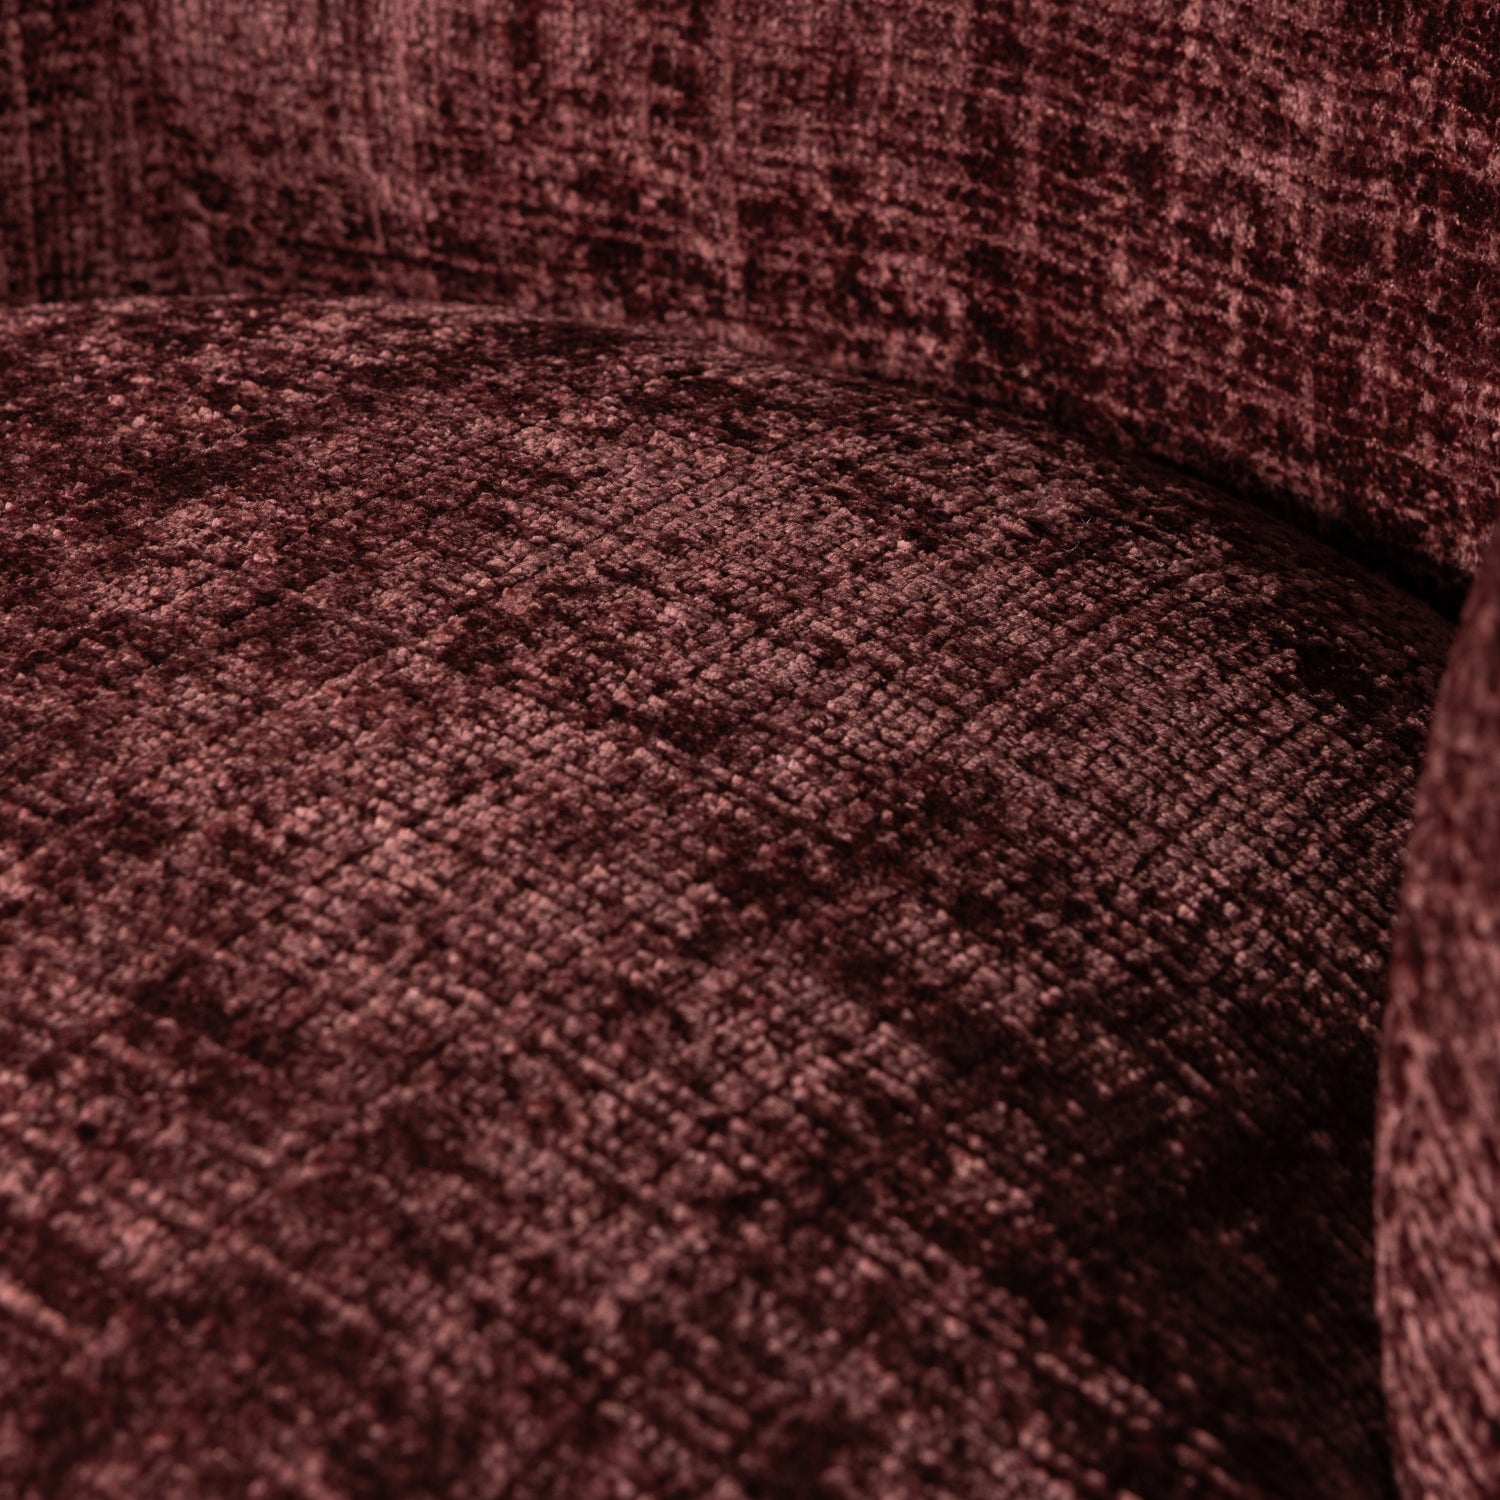 800037-A-01_VS_FA_Woolly_draaifauteuil_chenille_aubergine_detail.png?auto=webp&format=png&width=1500&height=1500